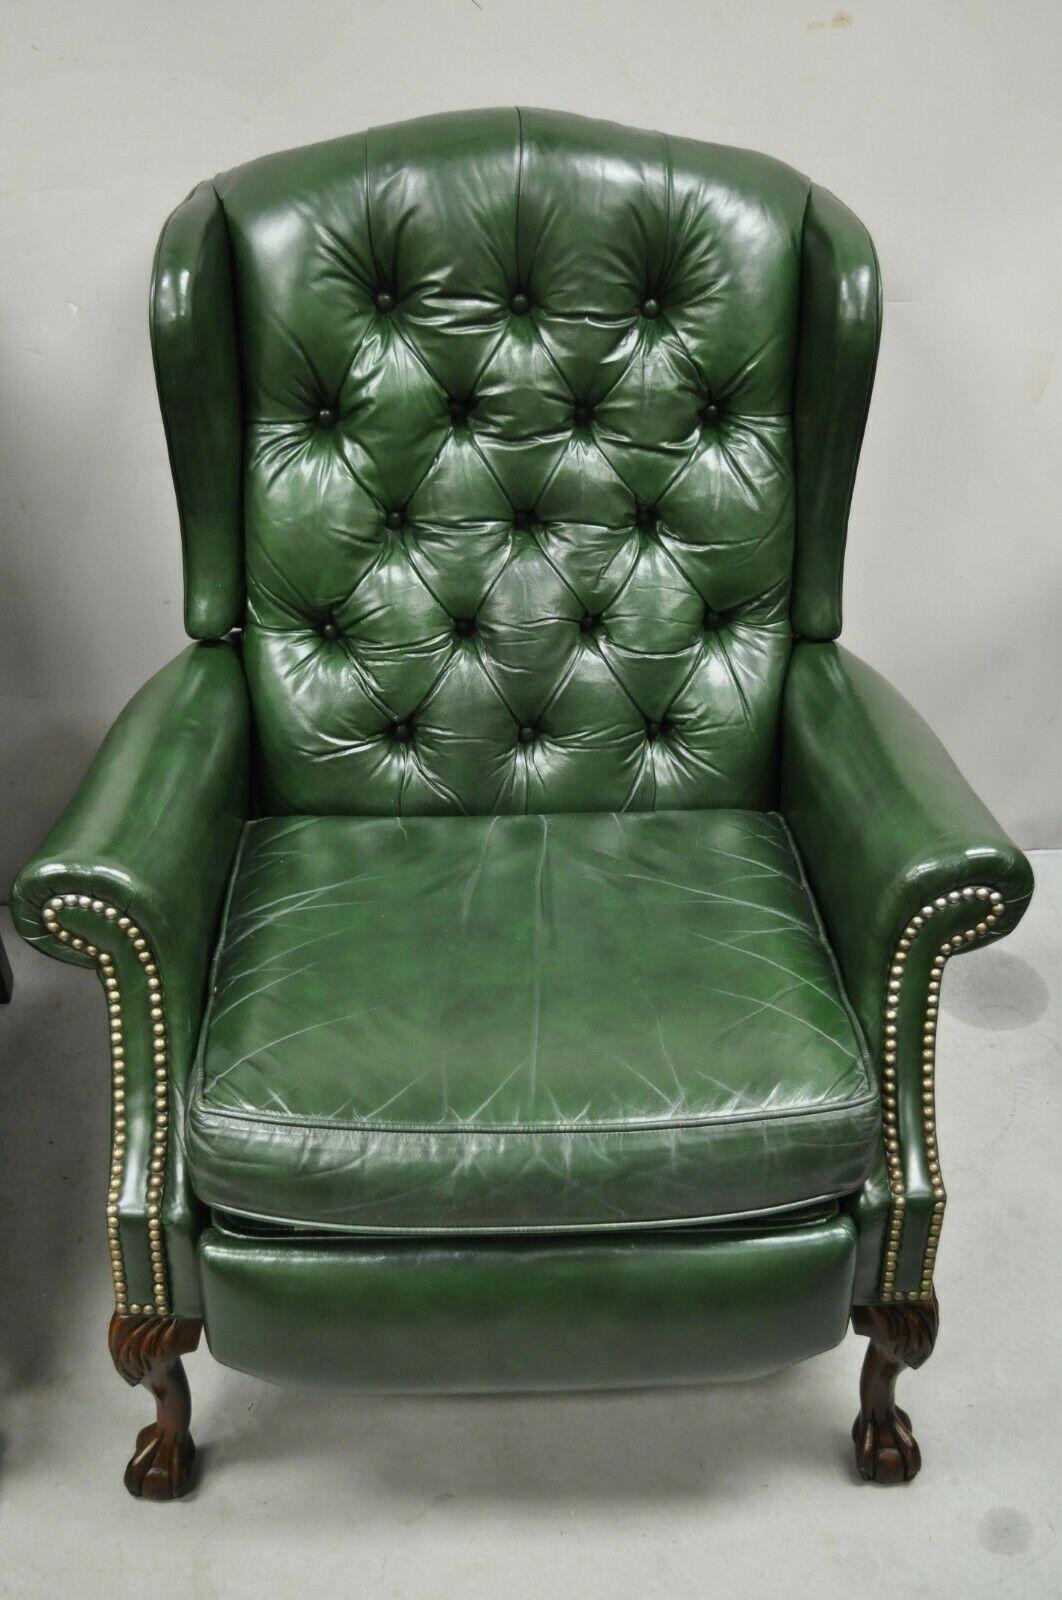 Bradington Young Green Leather Chesterfield Reclining Wingback Chairs - a Pair. Item features Reclining wing back frames, green button tufted leather chesterfield style upholstery, original labels, carved ball and claw feet, very nice vintage pair,